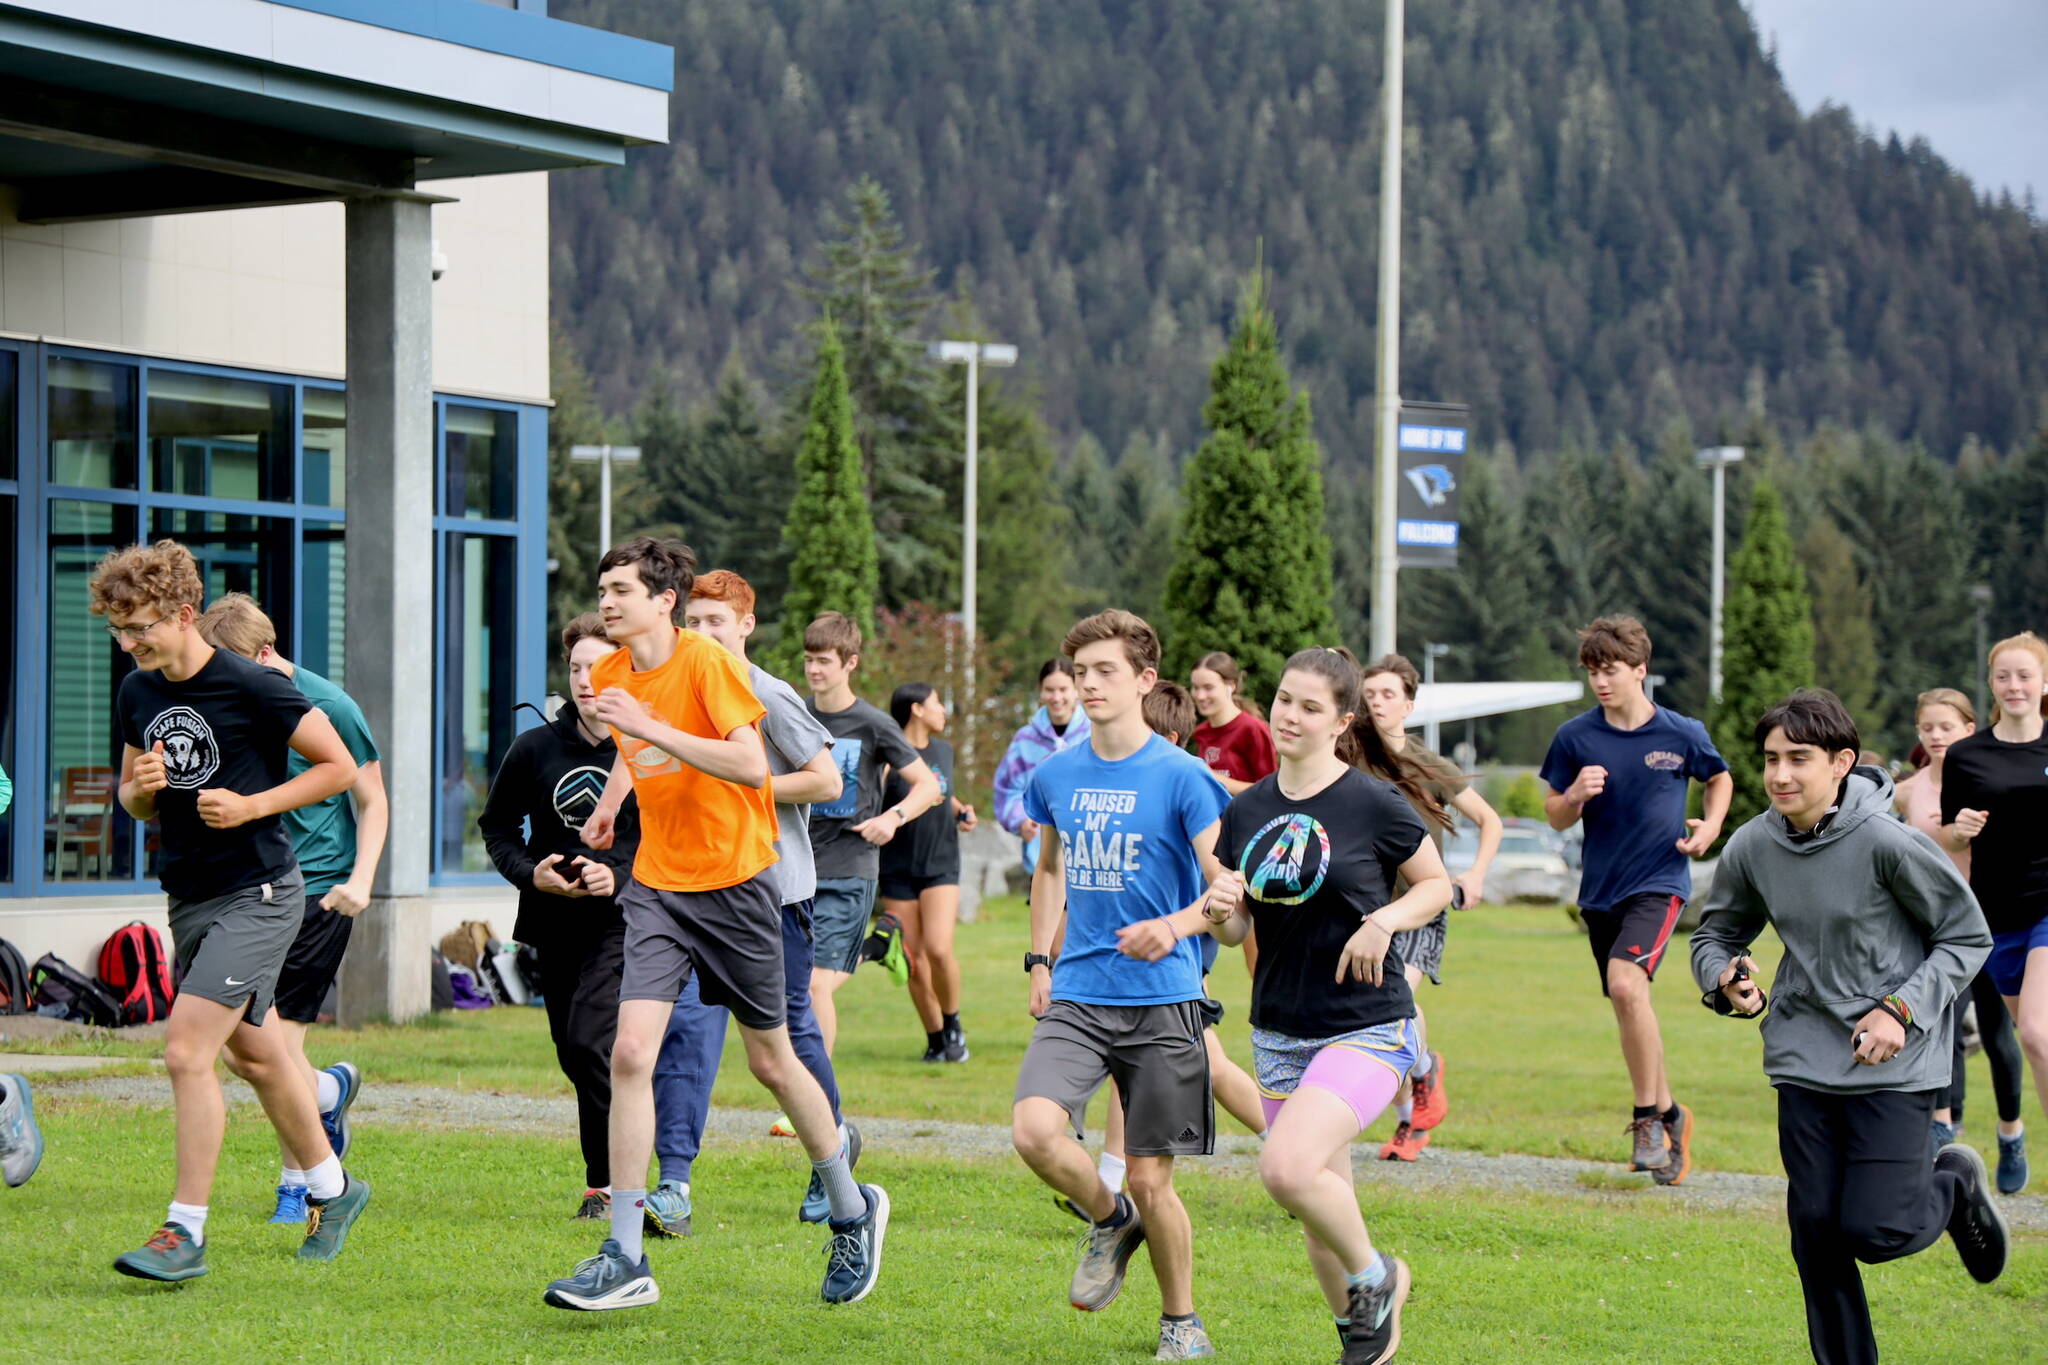 The Thunder Mountain High School cross-country team begin their workout during practice outside of the high school Thursday evening. (Clarise Larson / Juneau Empire)